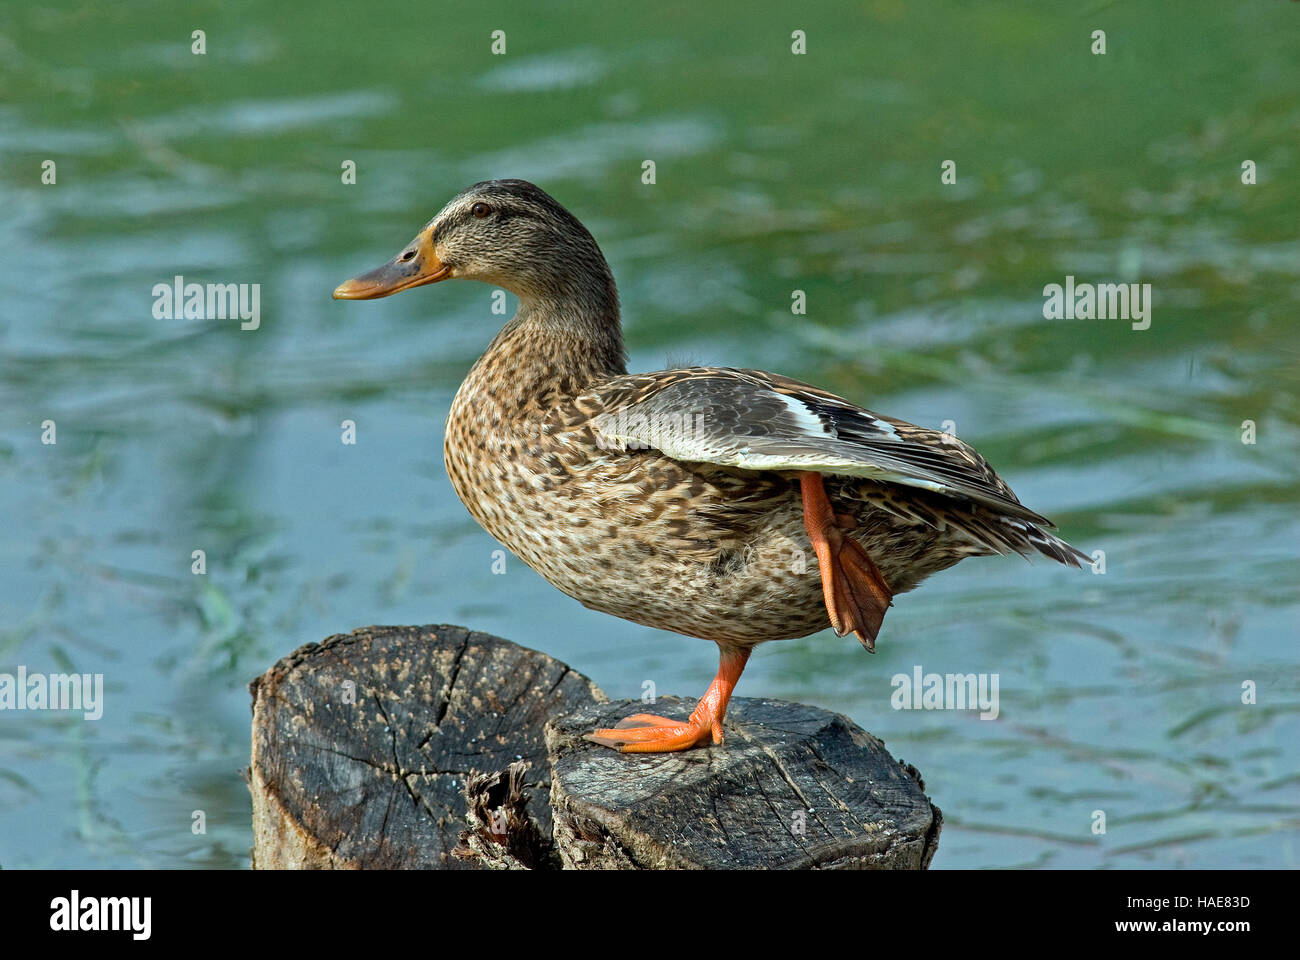 Canard colvert (Anas platyrhynchos), le lac Trasimène, Ombrie, Italie Banque D'Images